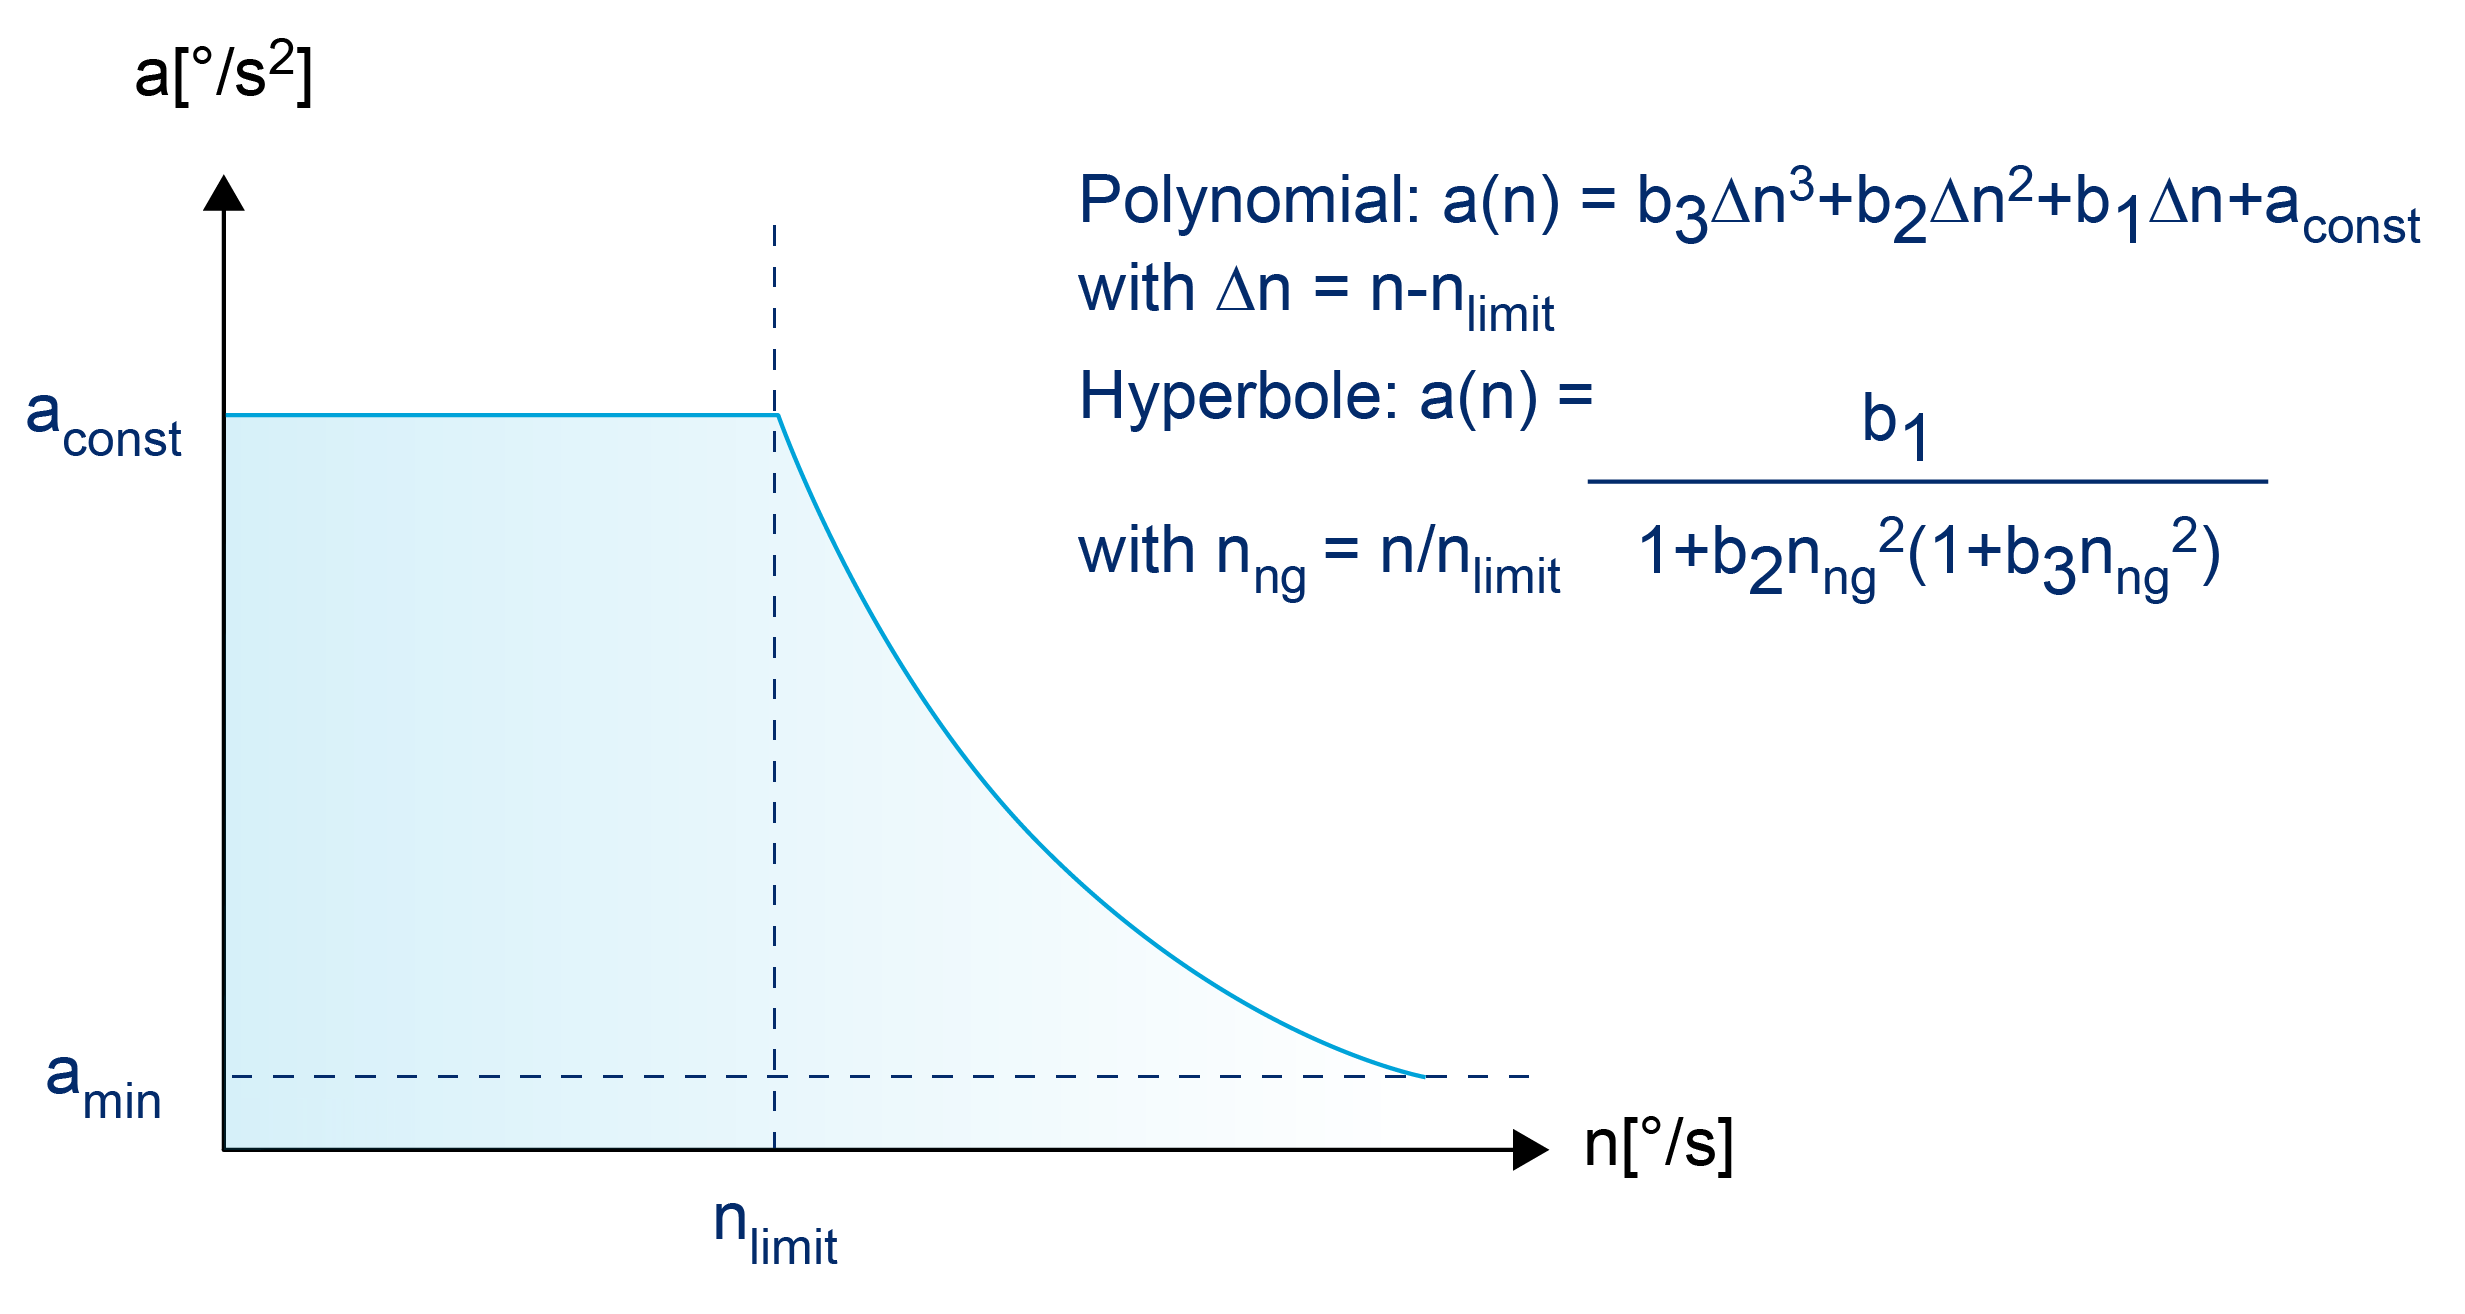 Profile of acceleration based on a polynomial or hyperbole